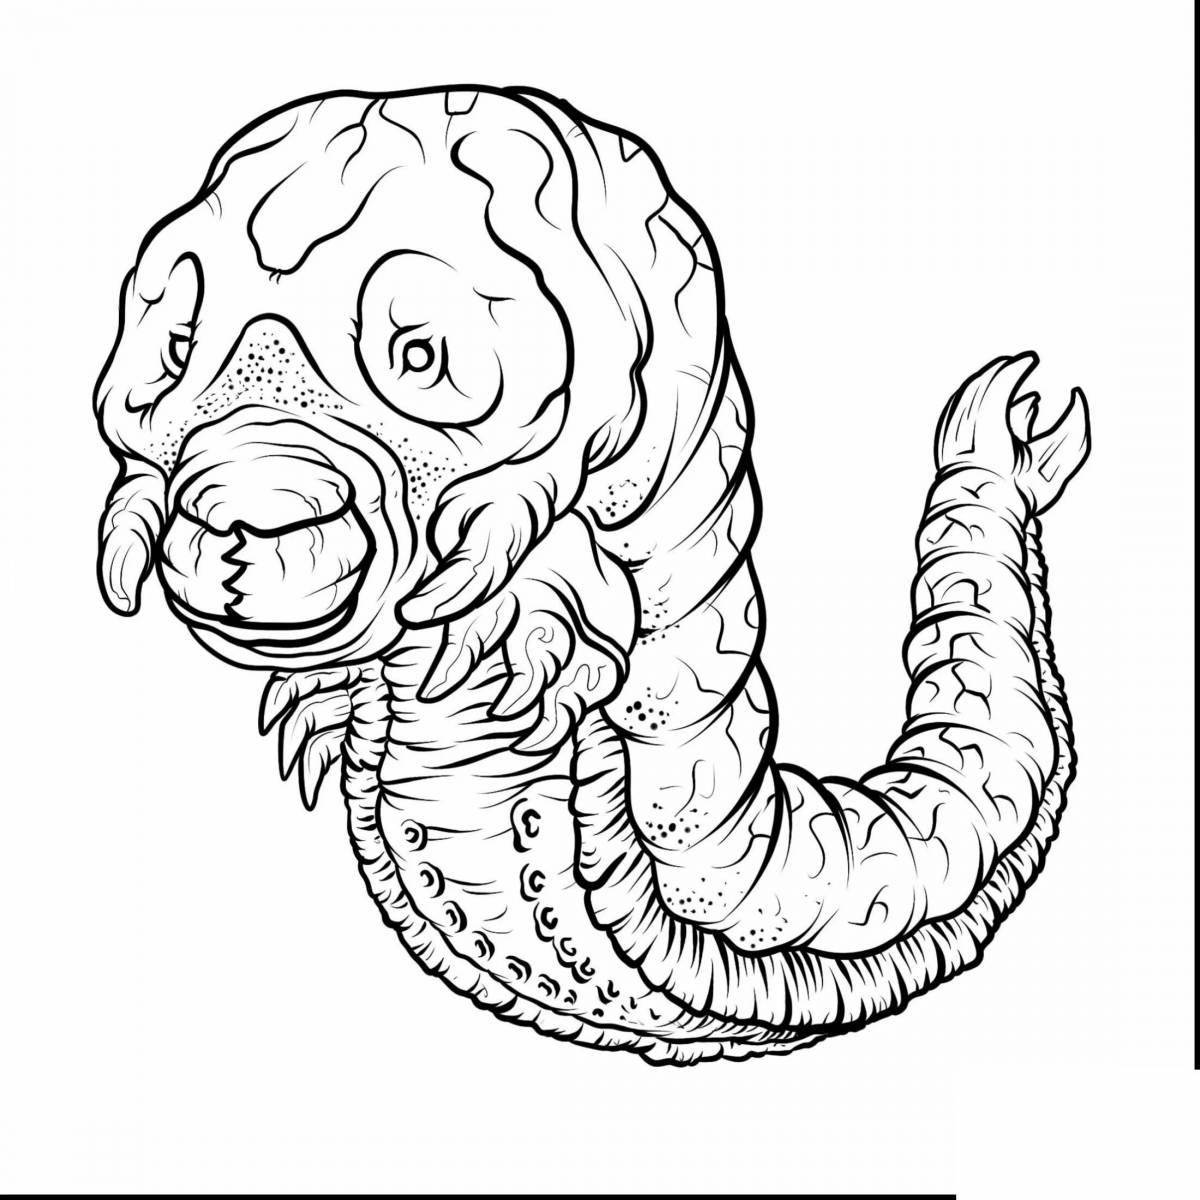 Worms eater coloring page